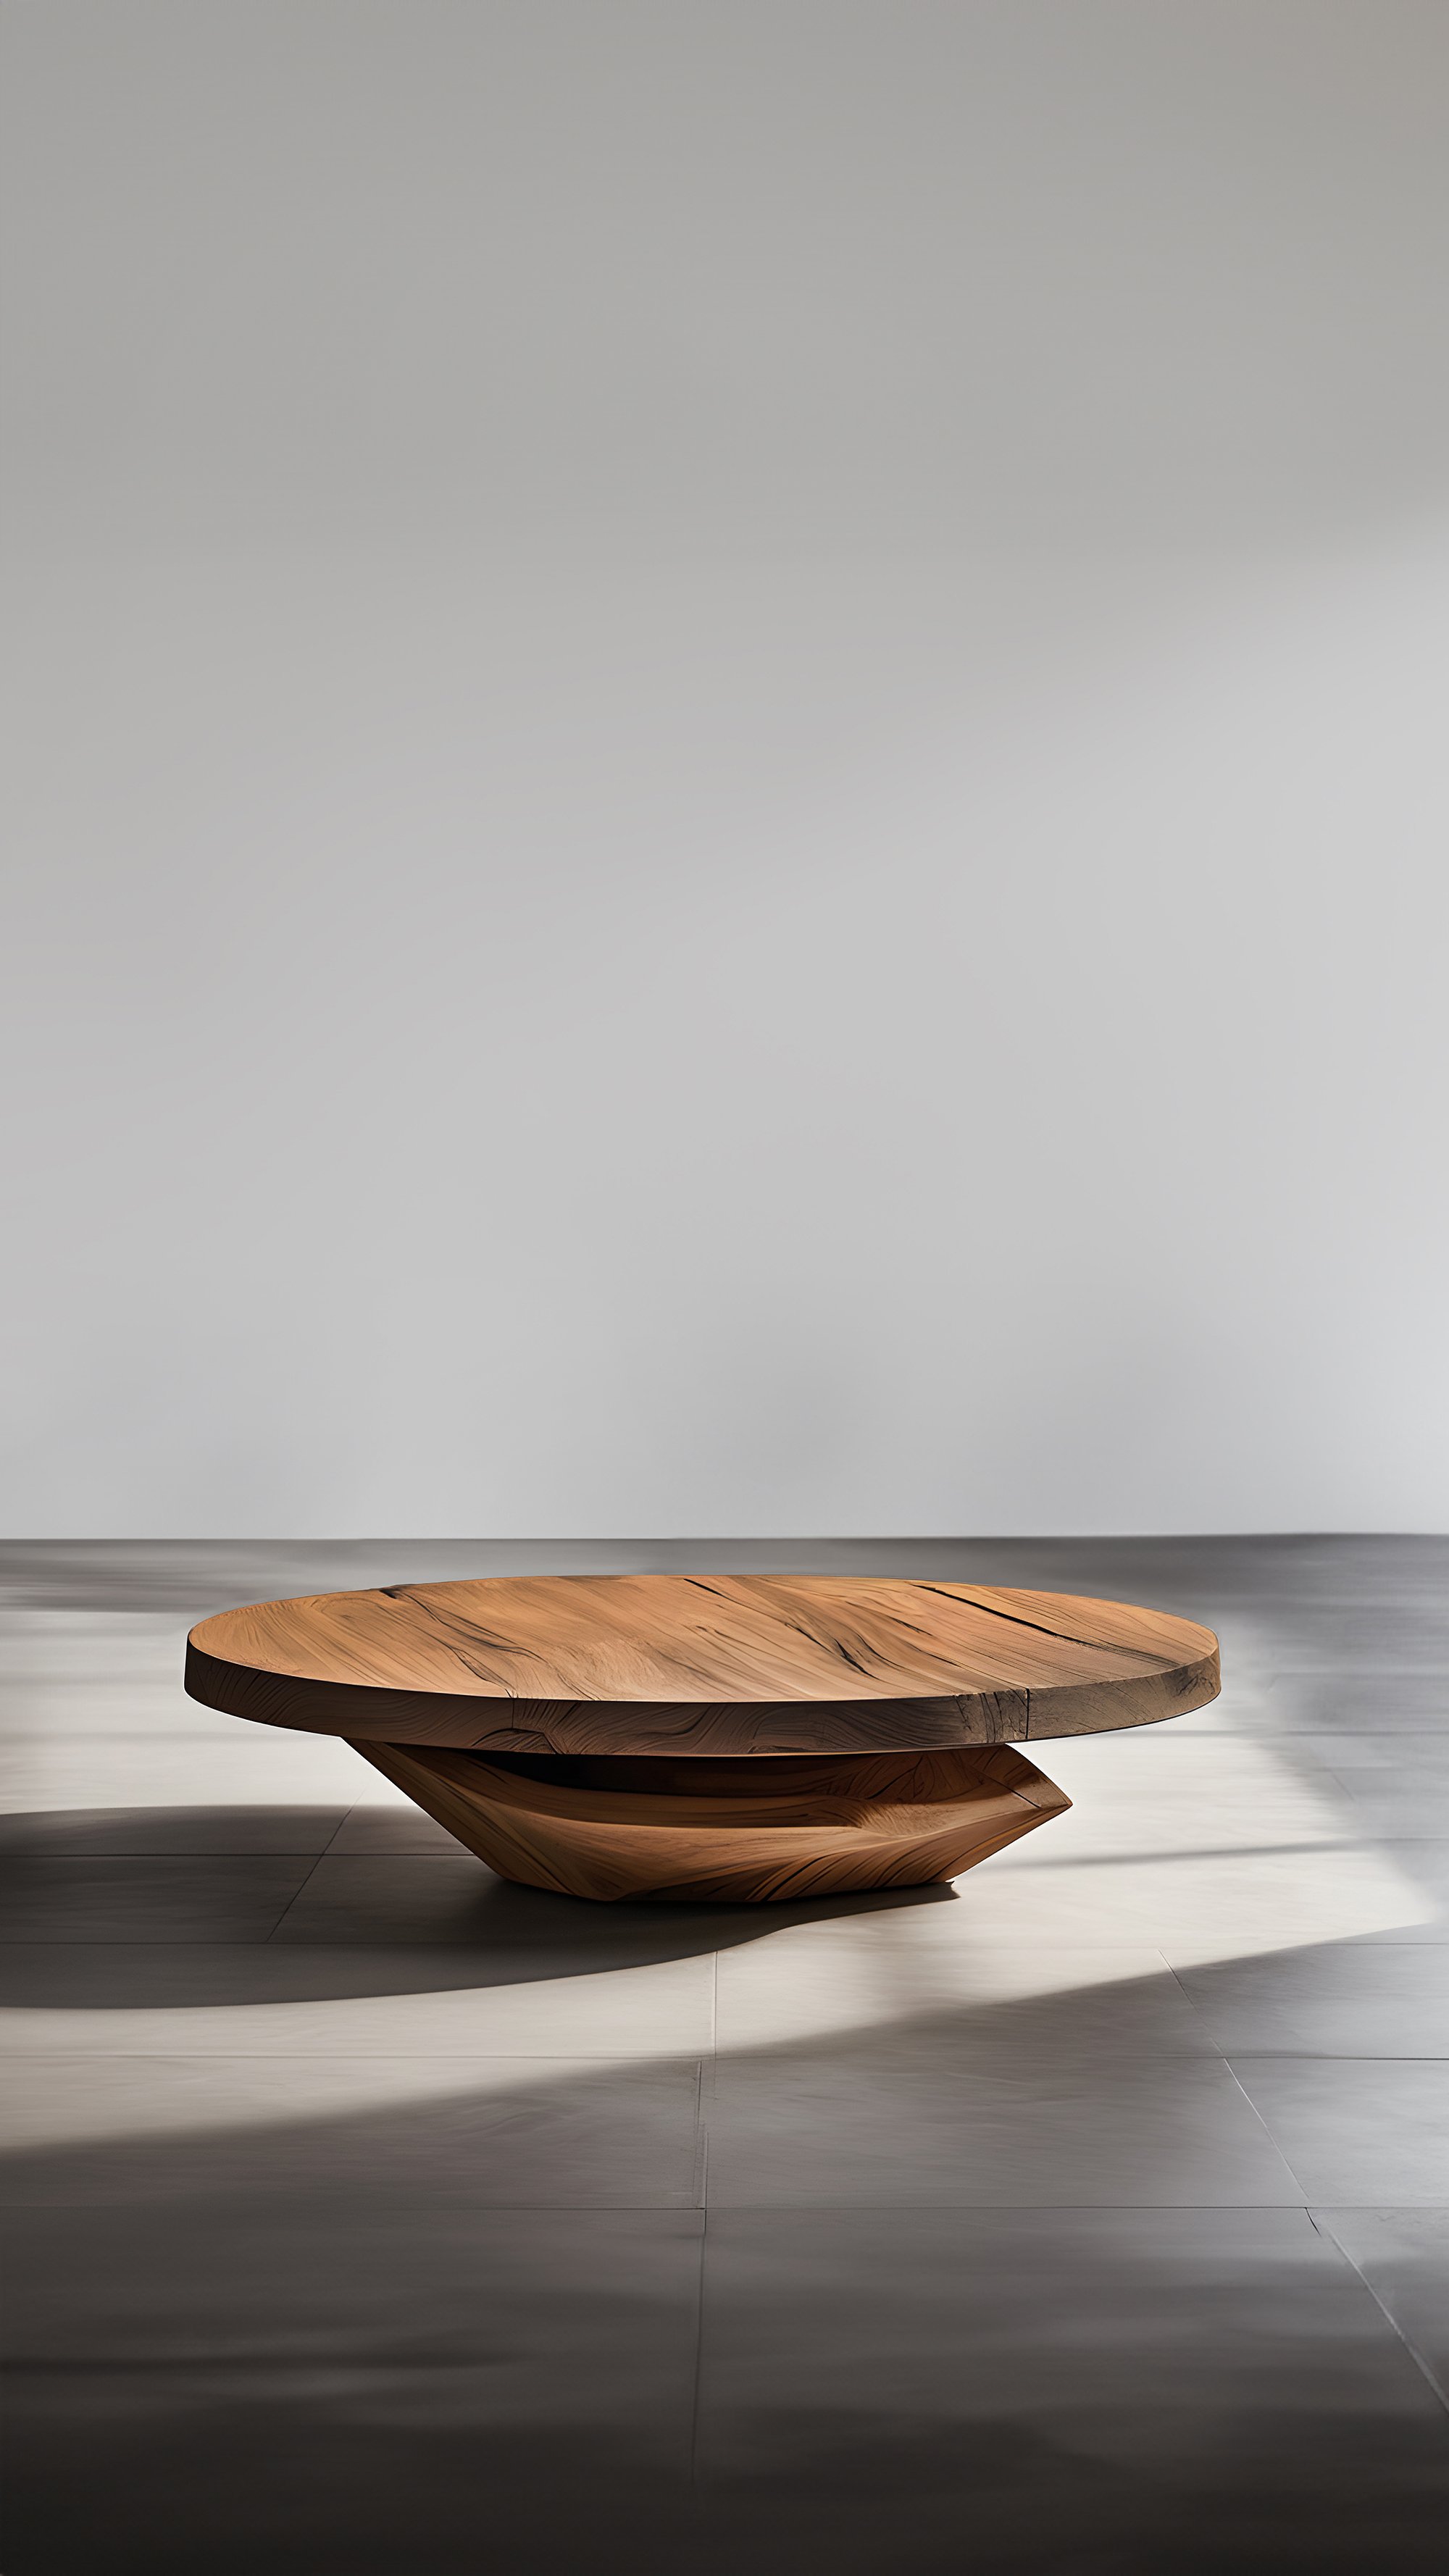 Sculptural Coffee Table Made of Solid Wood, Center Table Solace S50 by Joel Escalona — 8.jpg